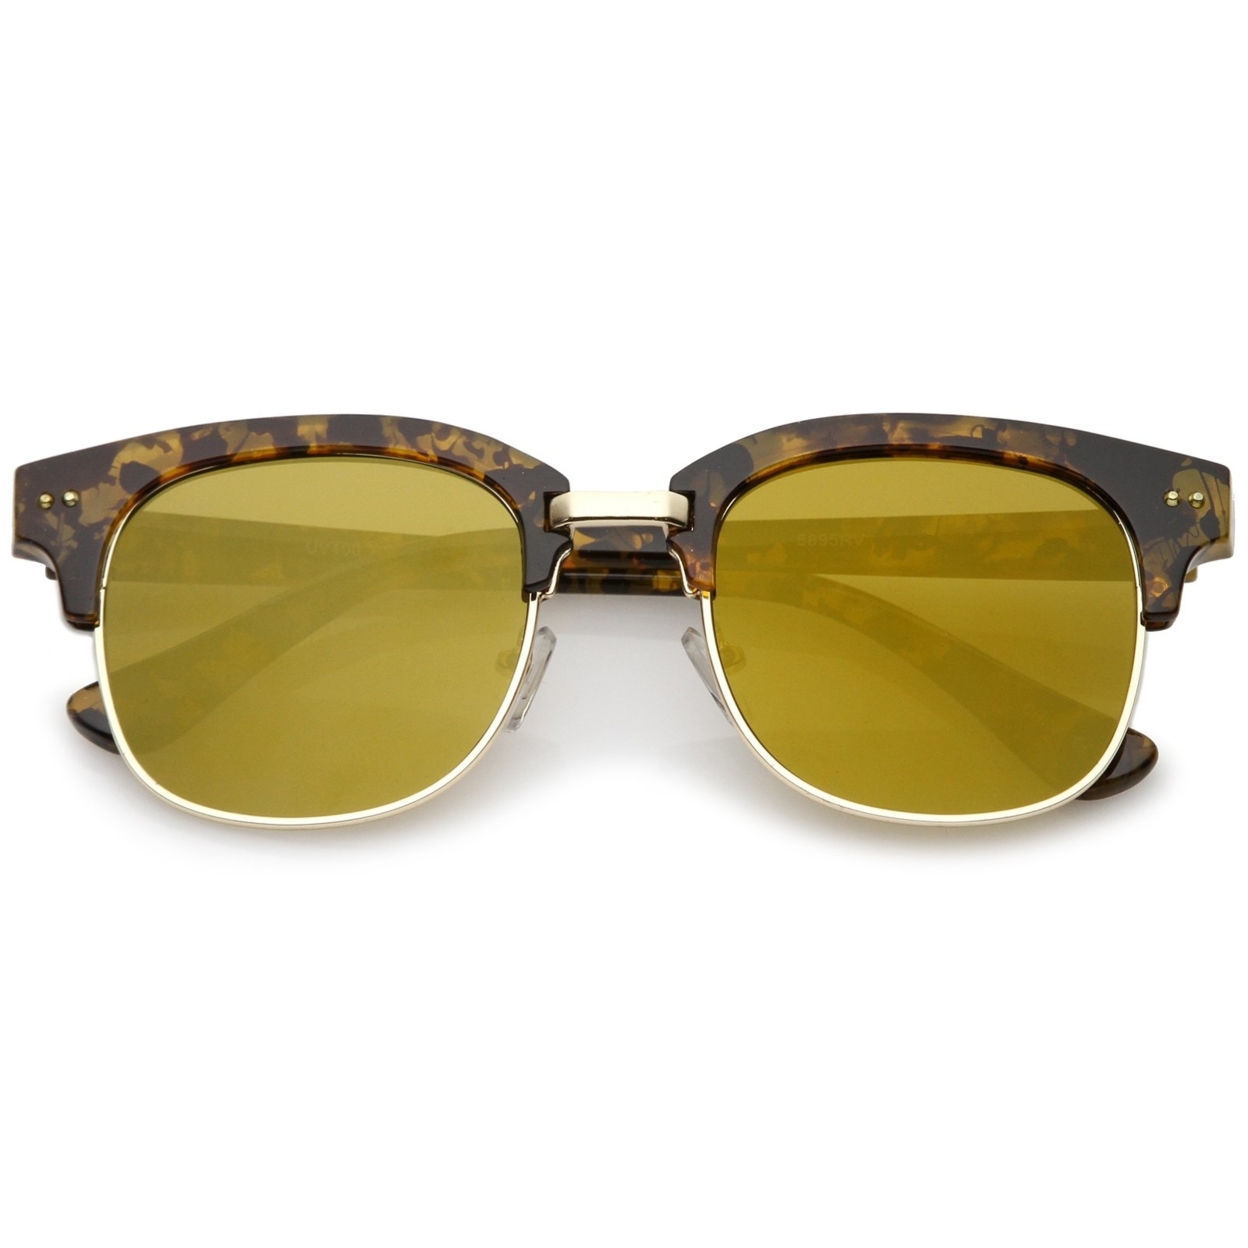 Modern Marble Print Horn Rimmed Mirrored Square Flat Lens Half Frame Sunglasses 51mm - Grey-Gold / Silver Mirror